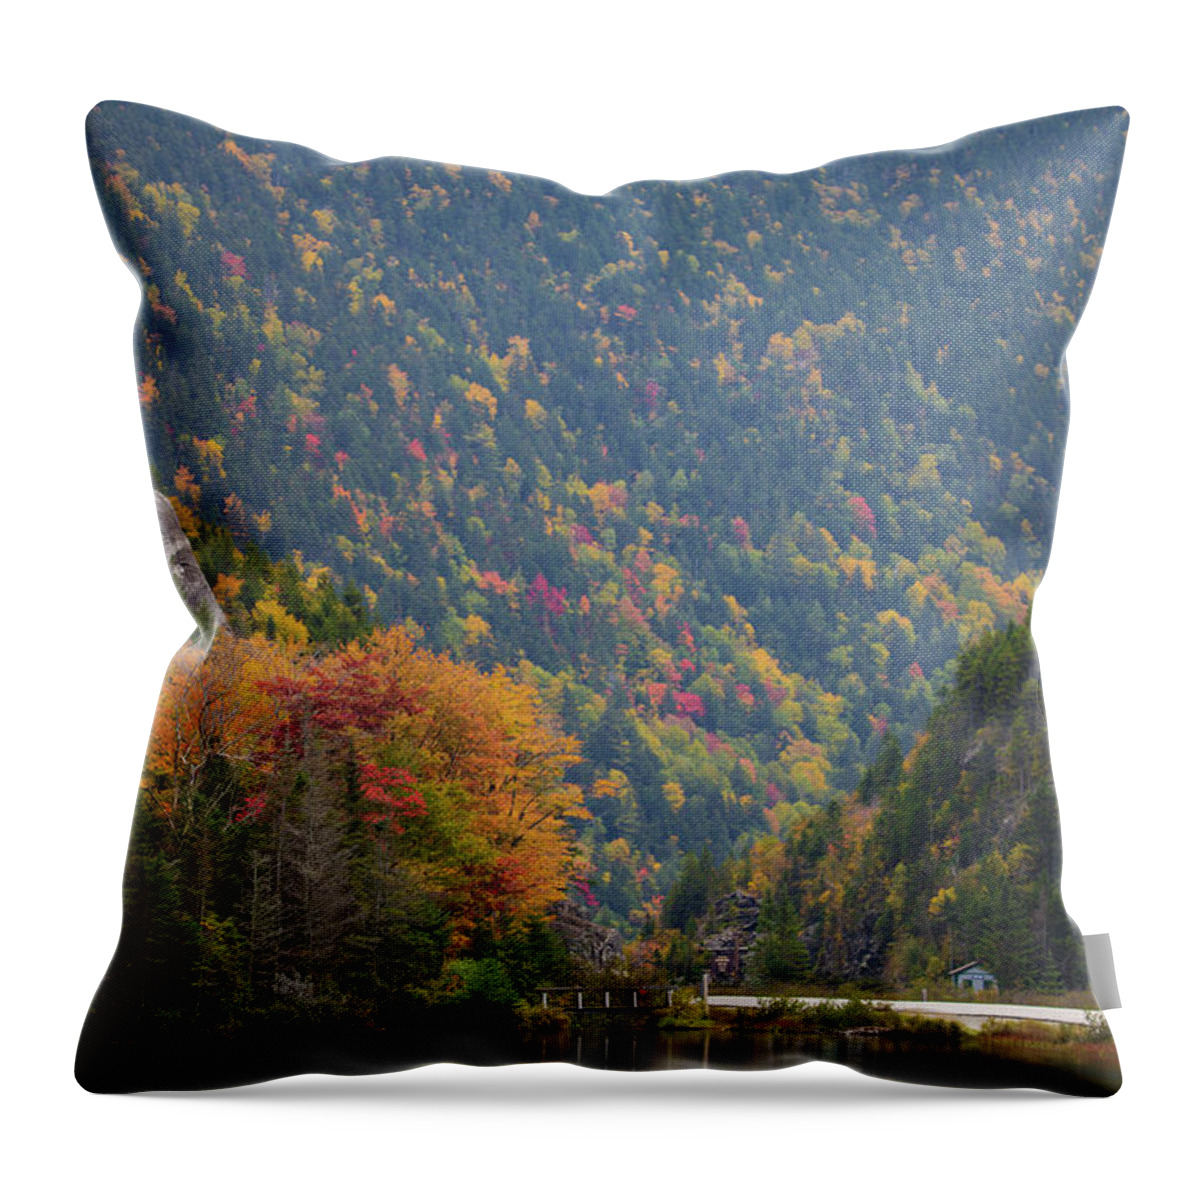 Elephant Throw Pillow featuring the photograph Elephant Head Autumn by White Mountain Images